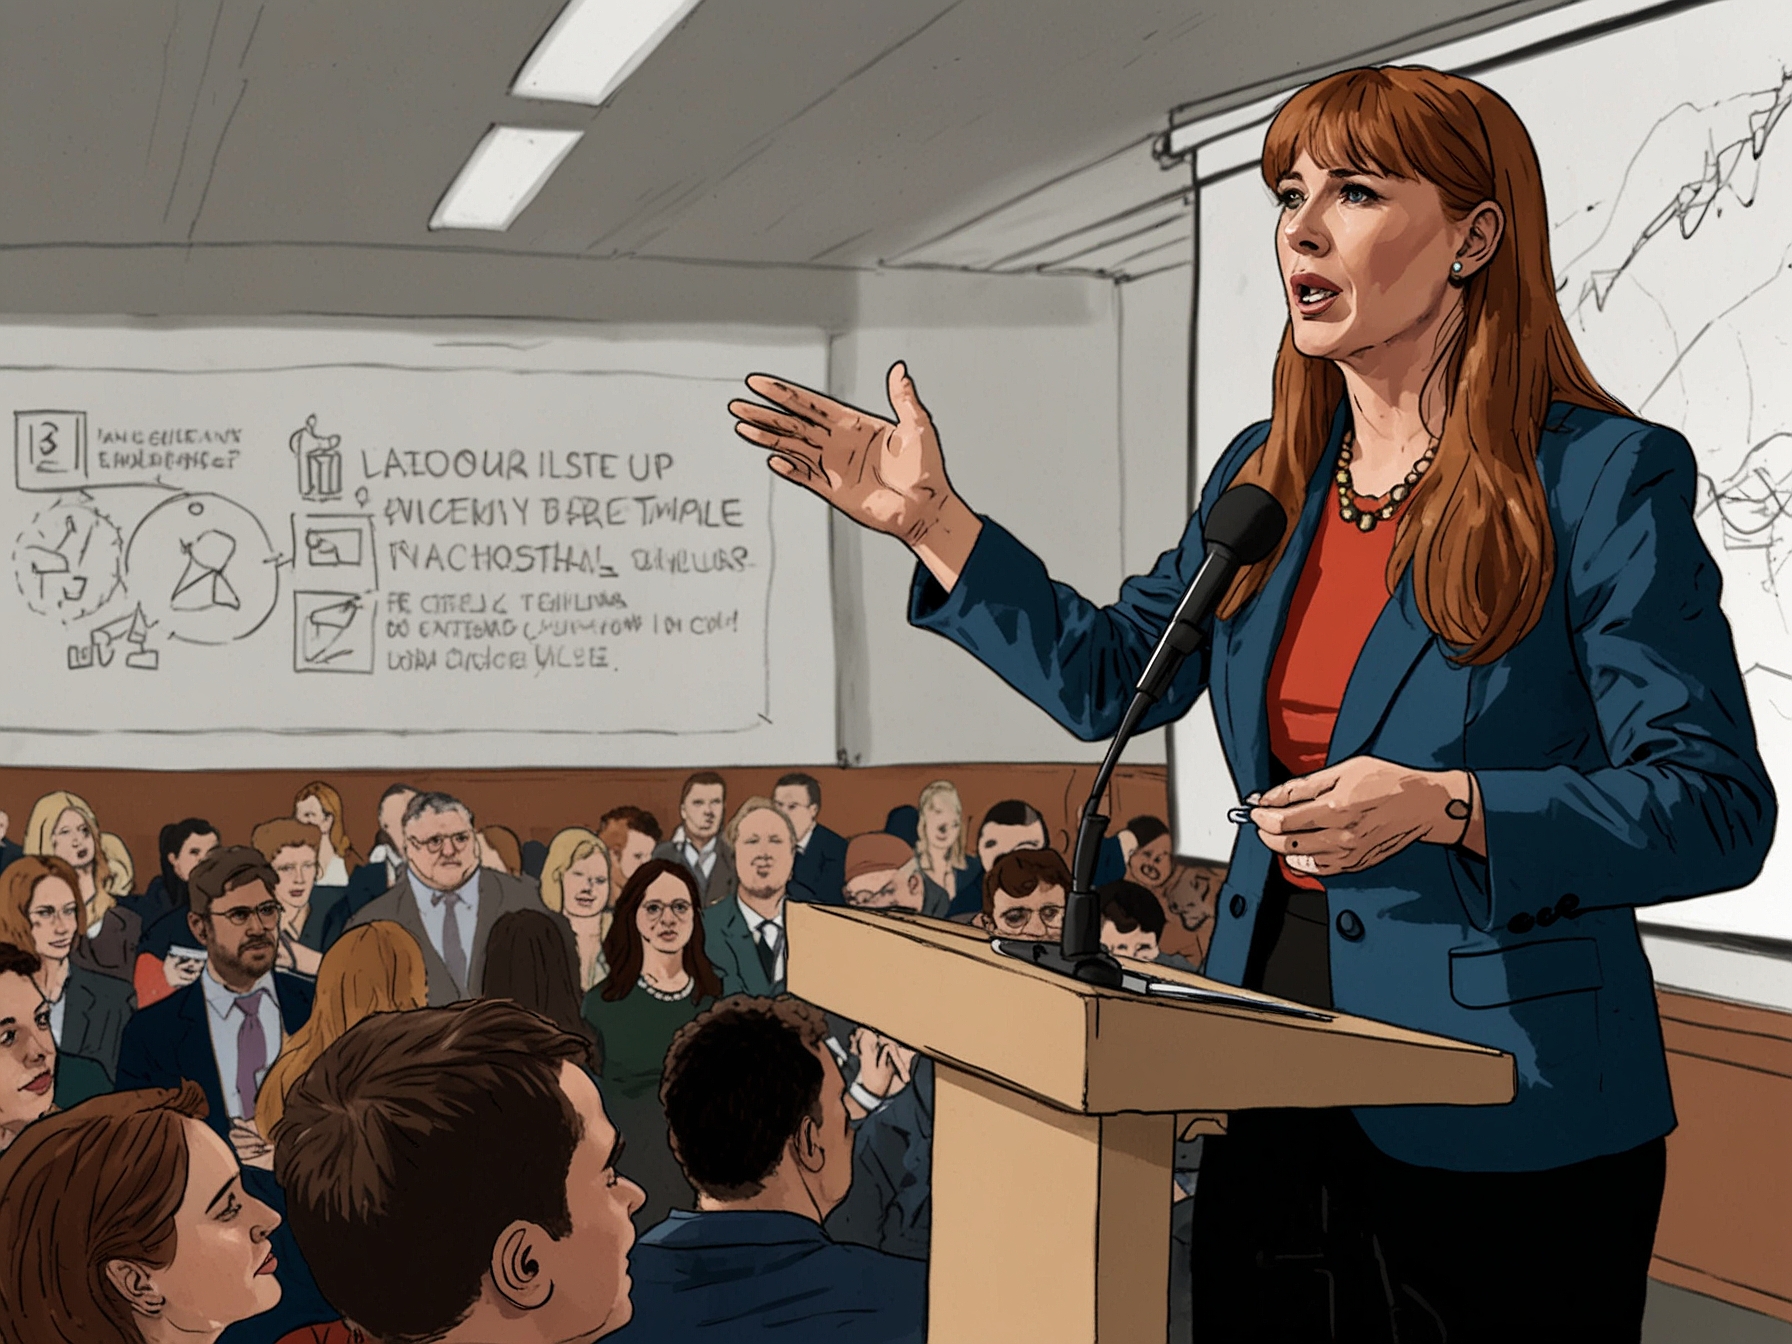 Angela Rayner speaks at a Labour Party event, emphasizing the need for higher energy efficiency standards and declaring 'time is up' for bad landlords in the UK.